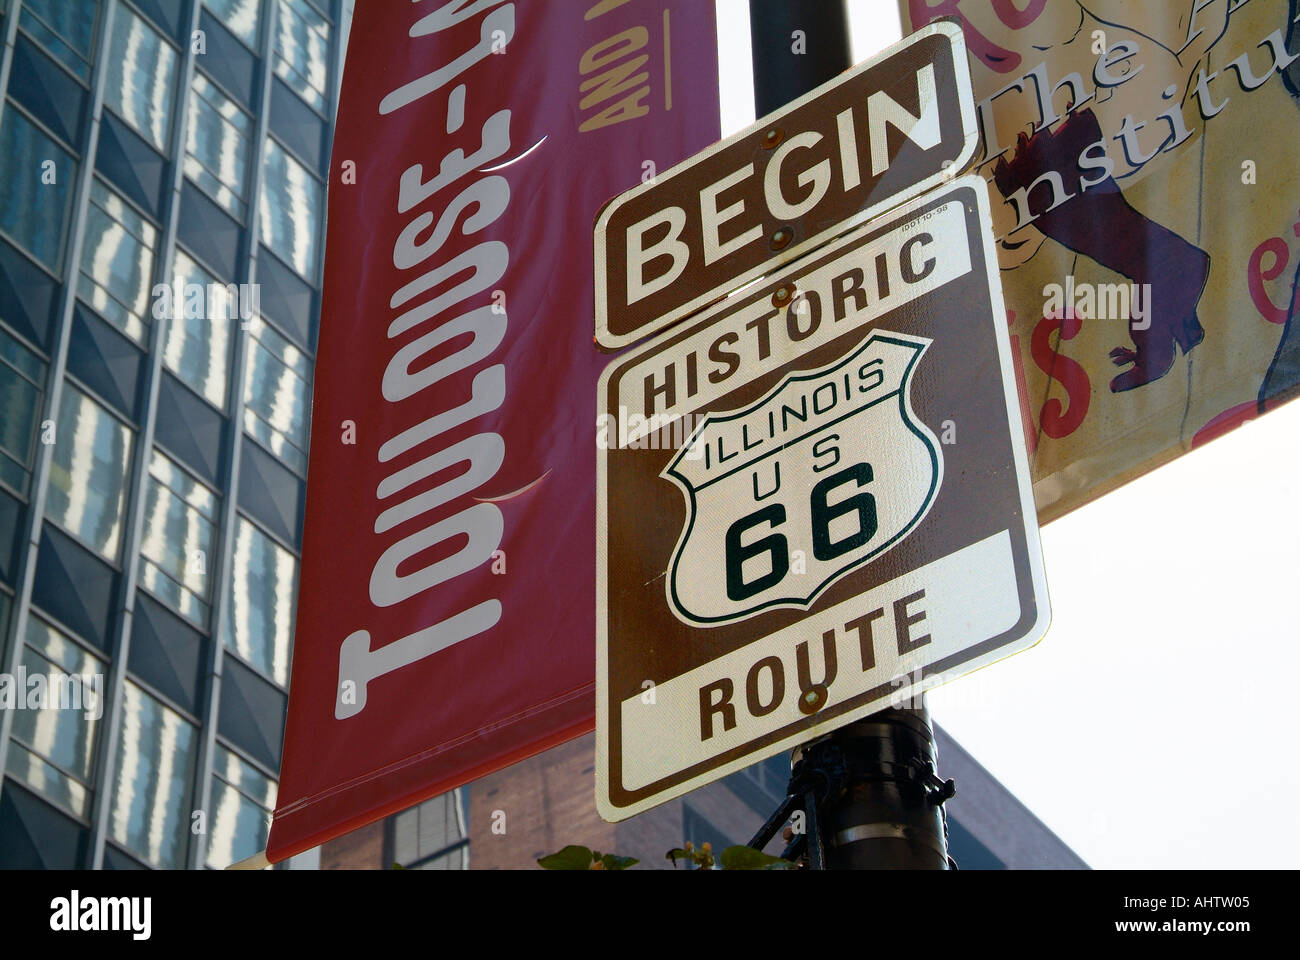 Historic Route 66 sign where designating the beginning of this historic  road located in downtown Chicago Illinois Stock Photo - Alamy